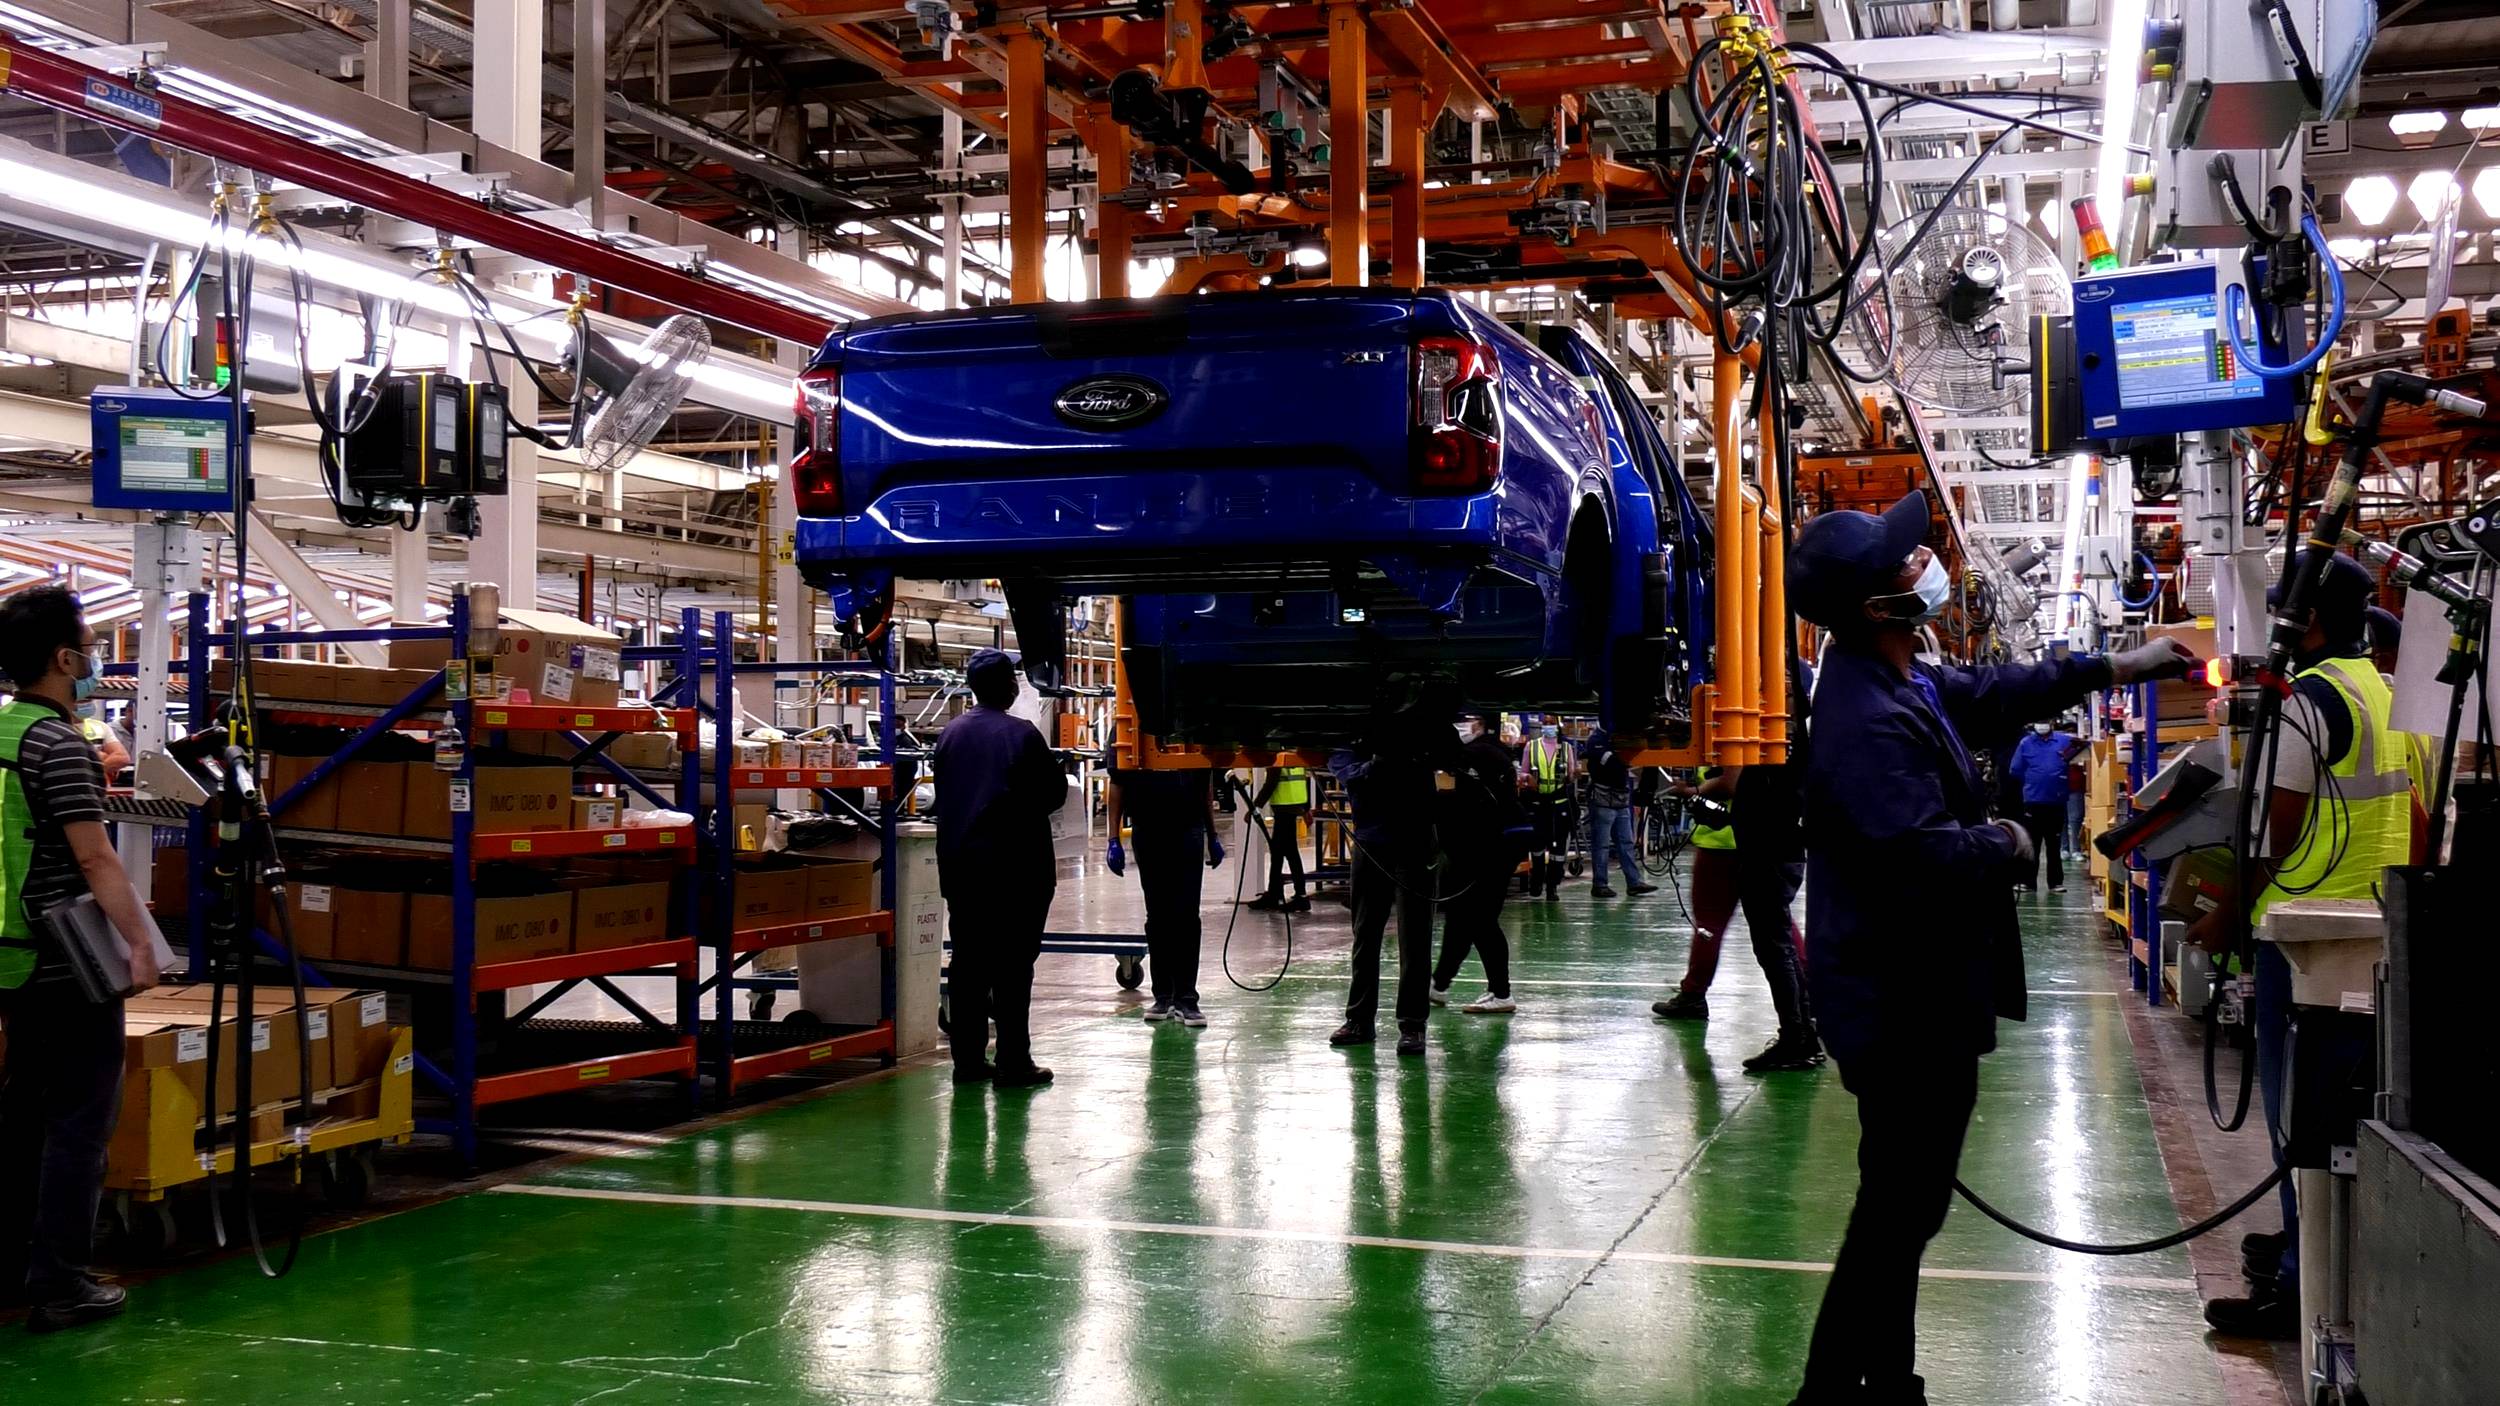 Ford Ramps up Production of Next-Gen Ranger, Continues Investing in World-Class Manufacturing